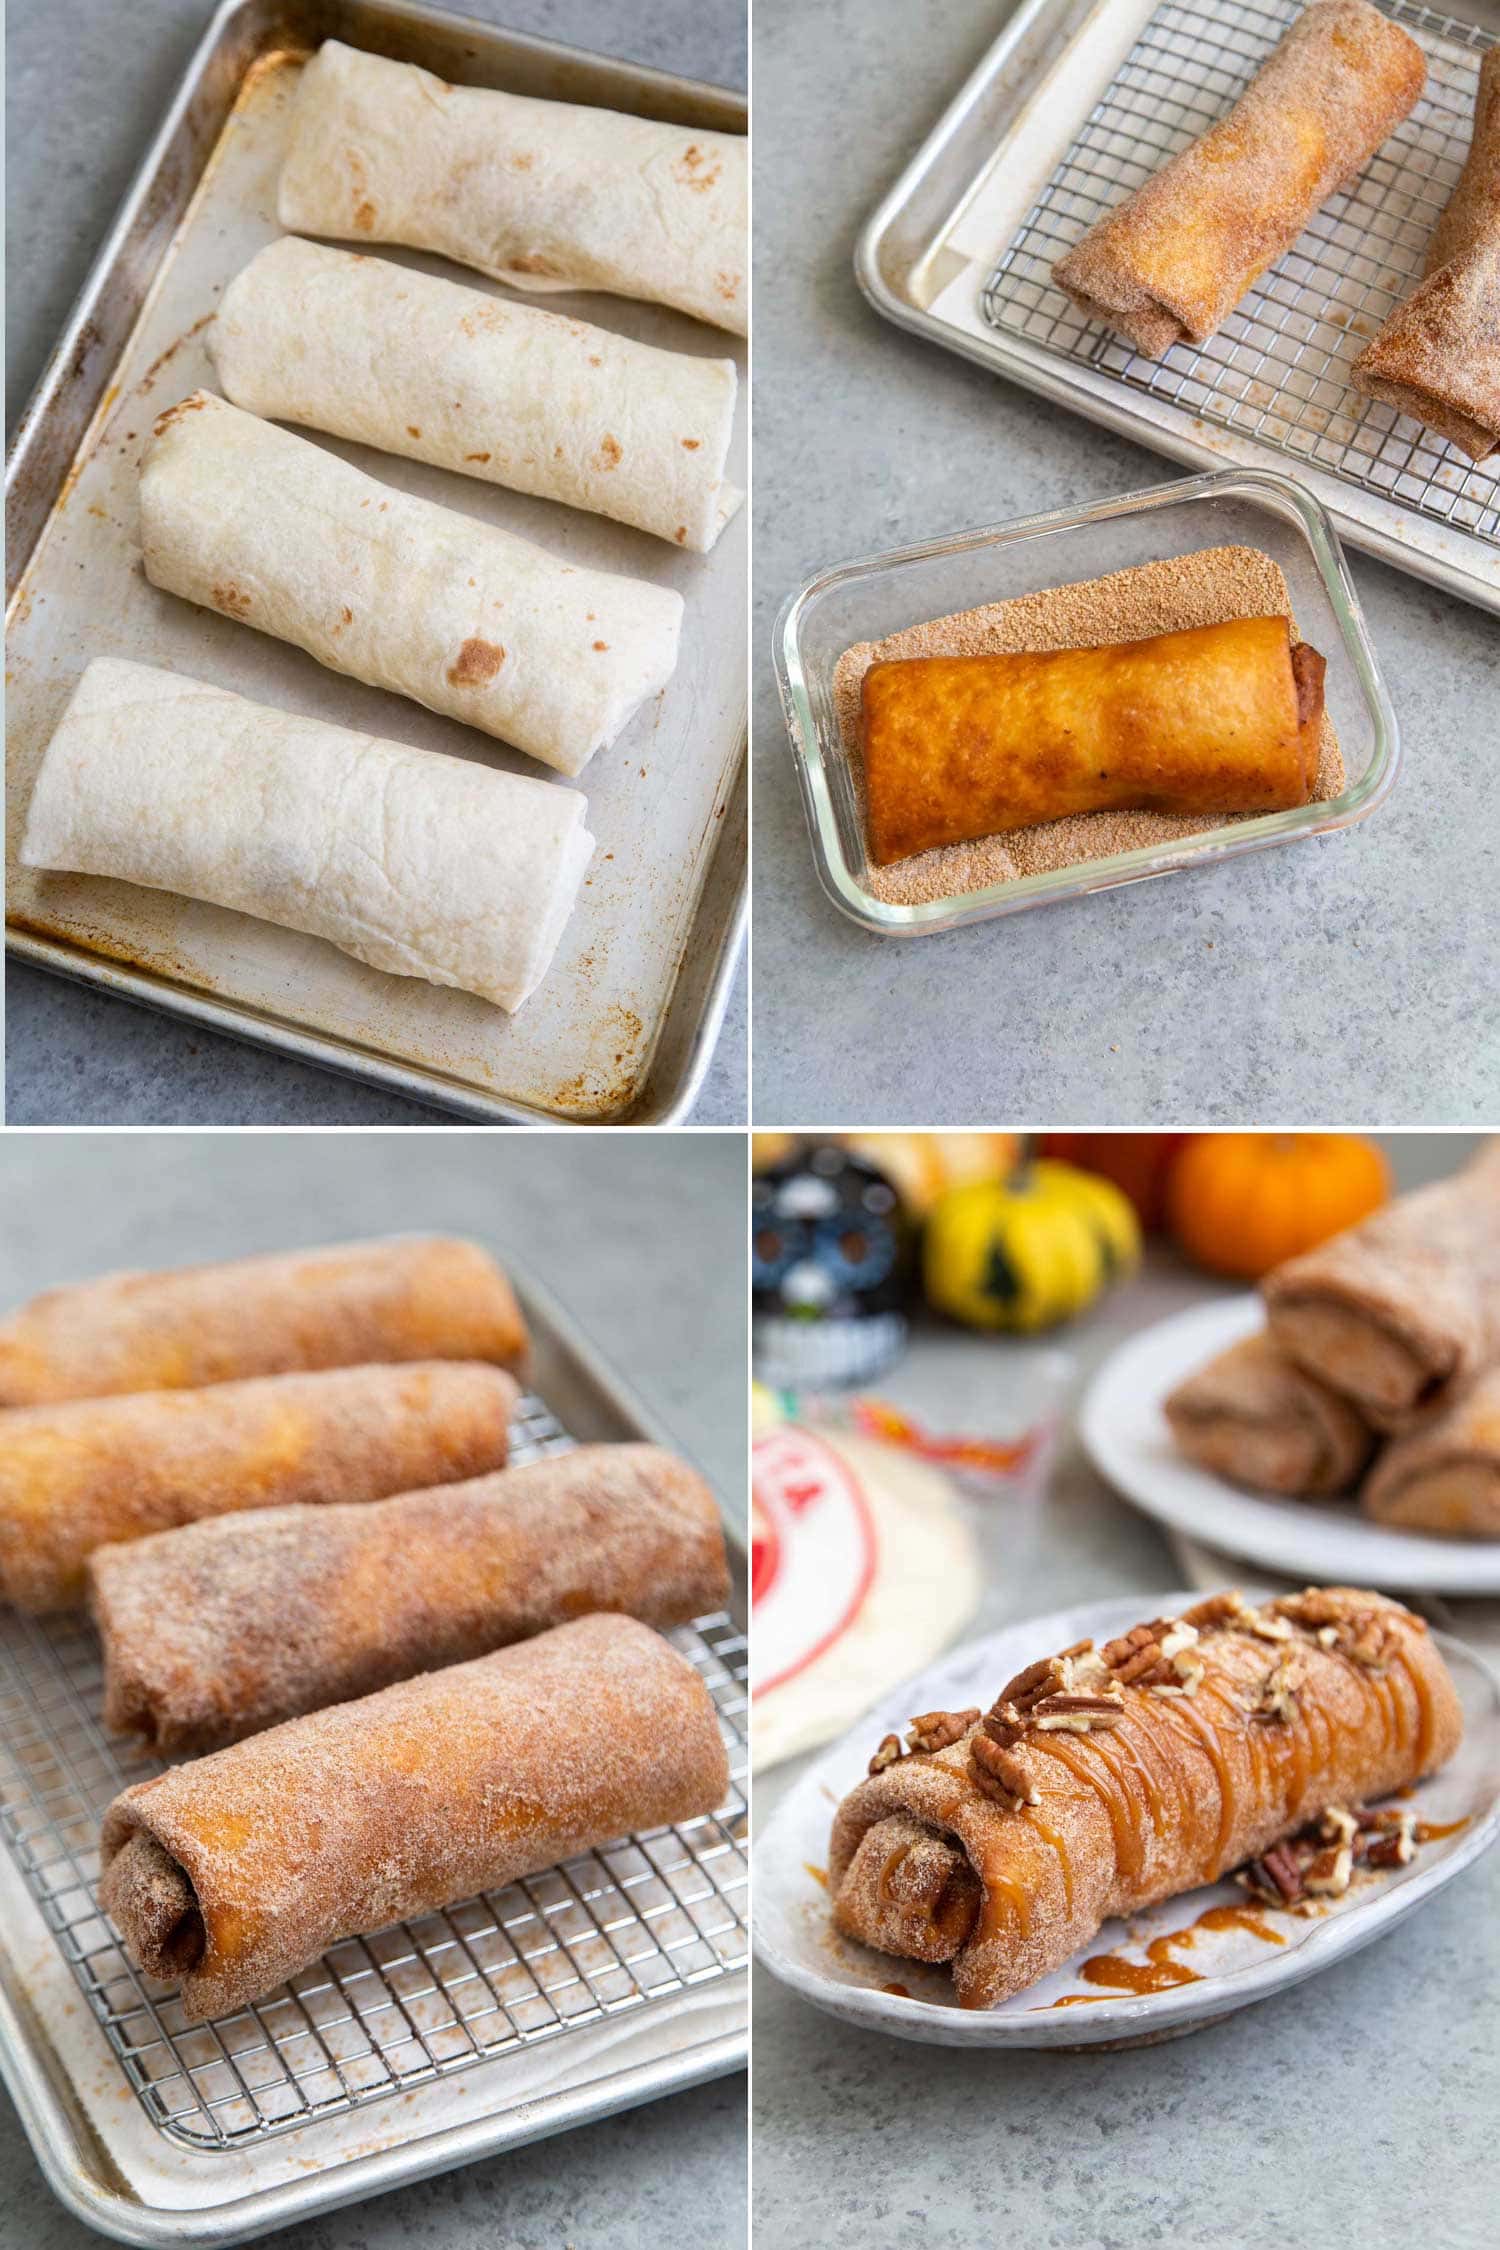 Pineapple Cheesecake Chimichangas. Crispy fried burritos filled with vanilla cream cheese and cinnamon spiced pineapple chunks. The dessert chimichangas are tossed in a sweet graham cracker powder.